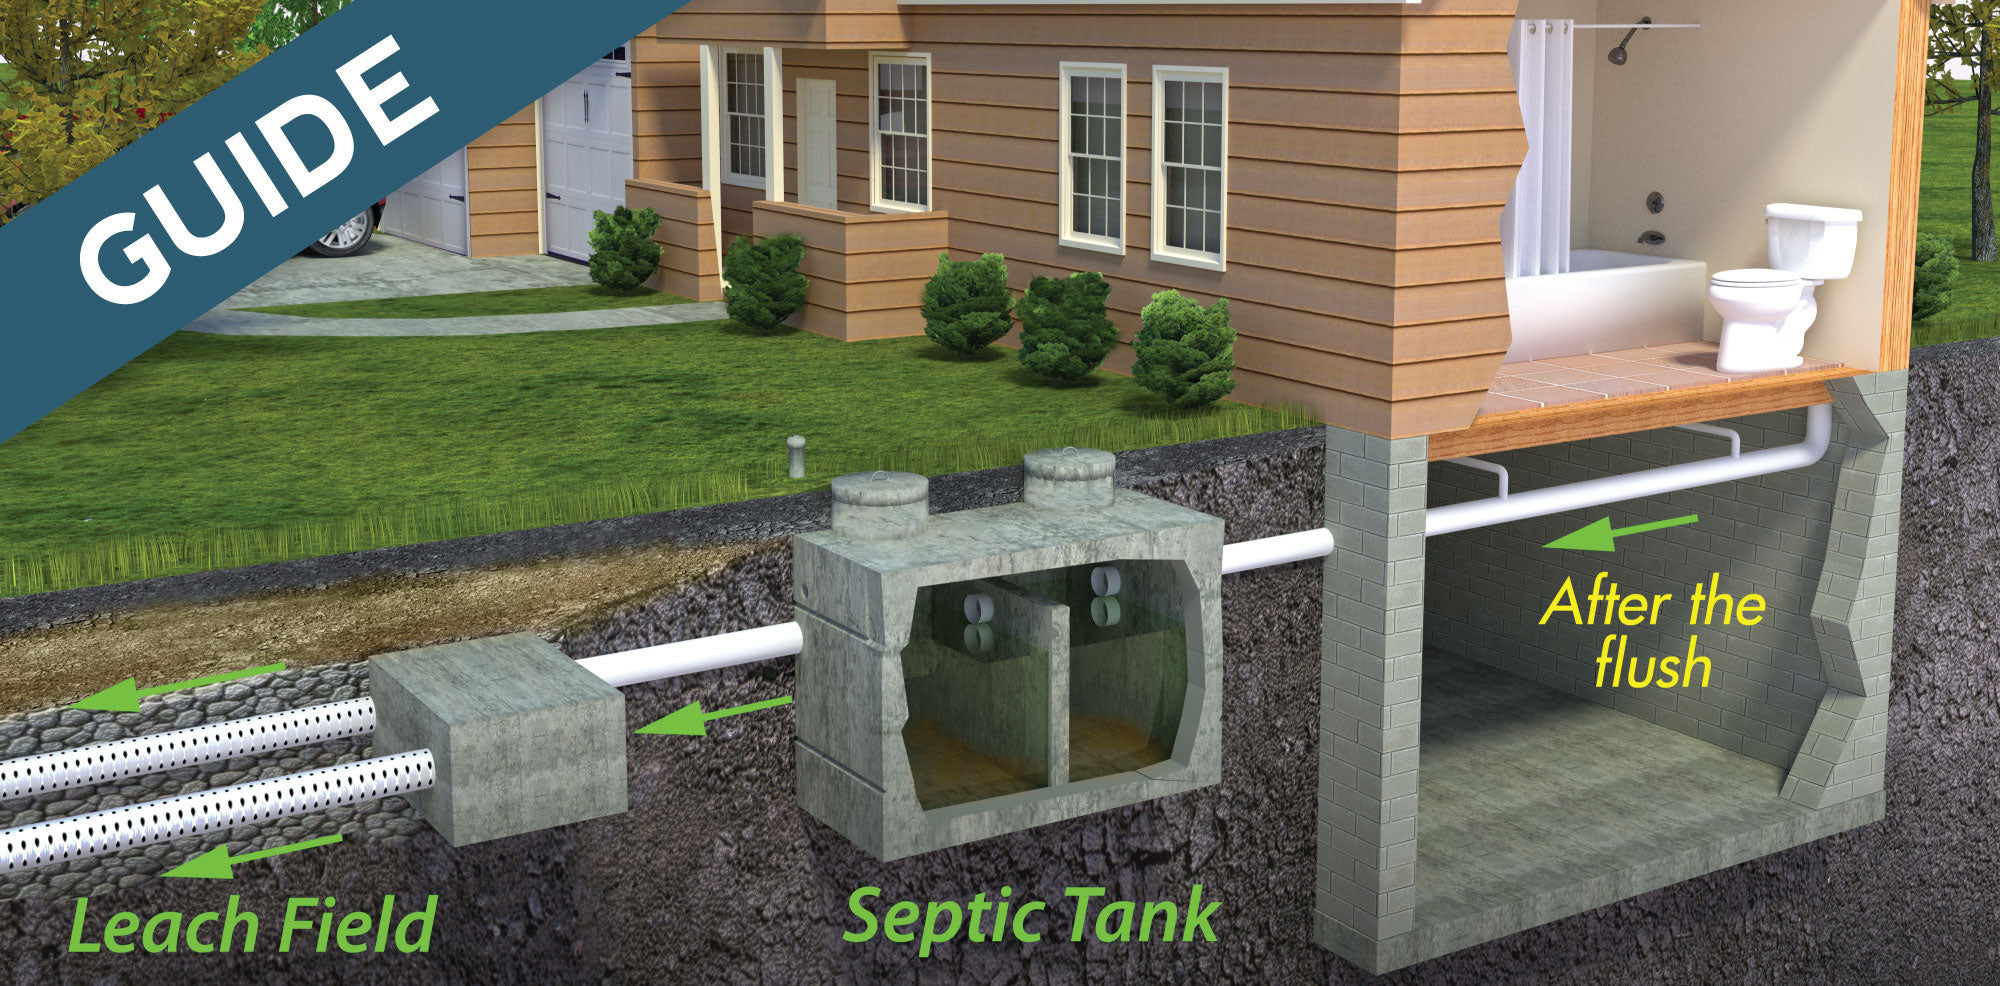 How does an aerobic septic system work? What are aerobic bacteria and anaerobic bacteria? Best septic treatment.